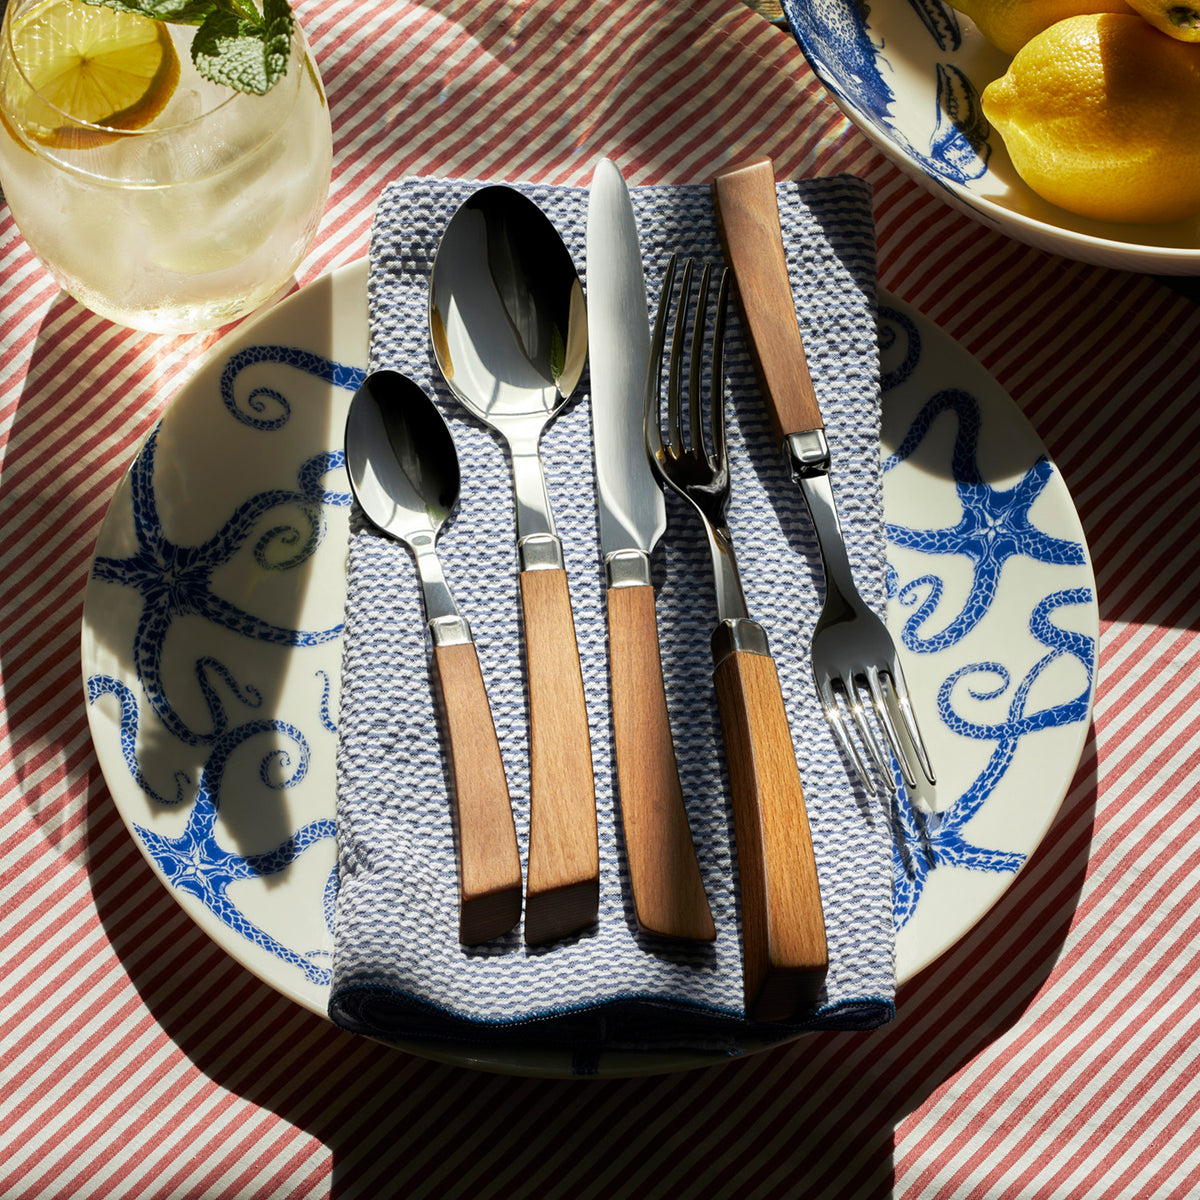 A Starfish Blue Coupe Dinner Plate from Caskata Artisanal Home with a spoon, fork, and knife.